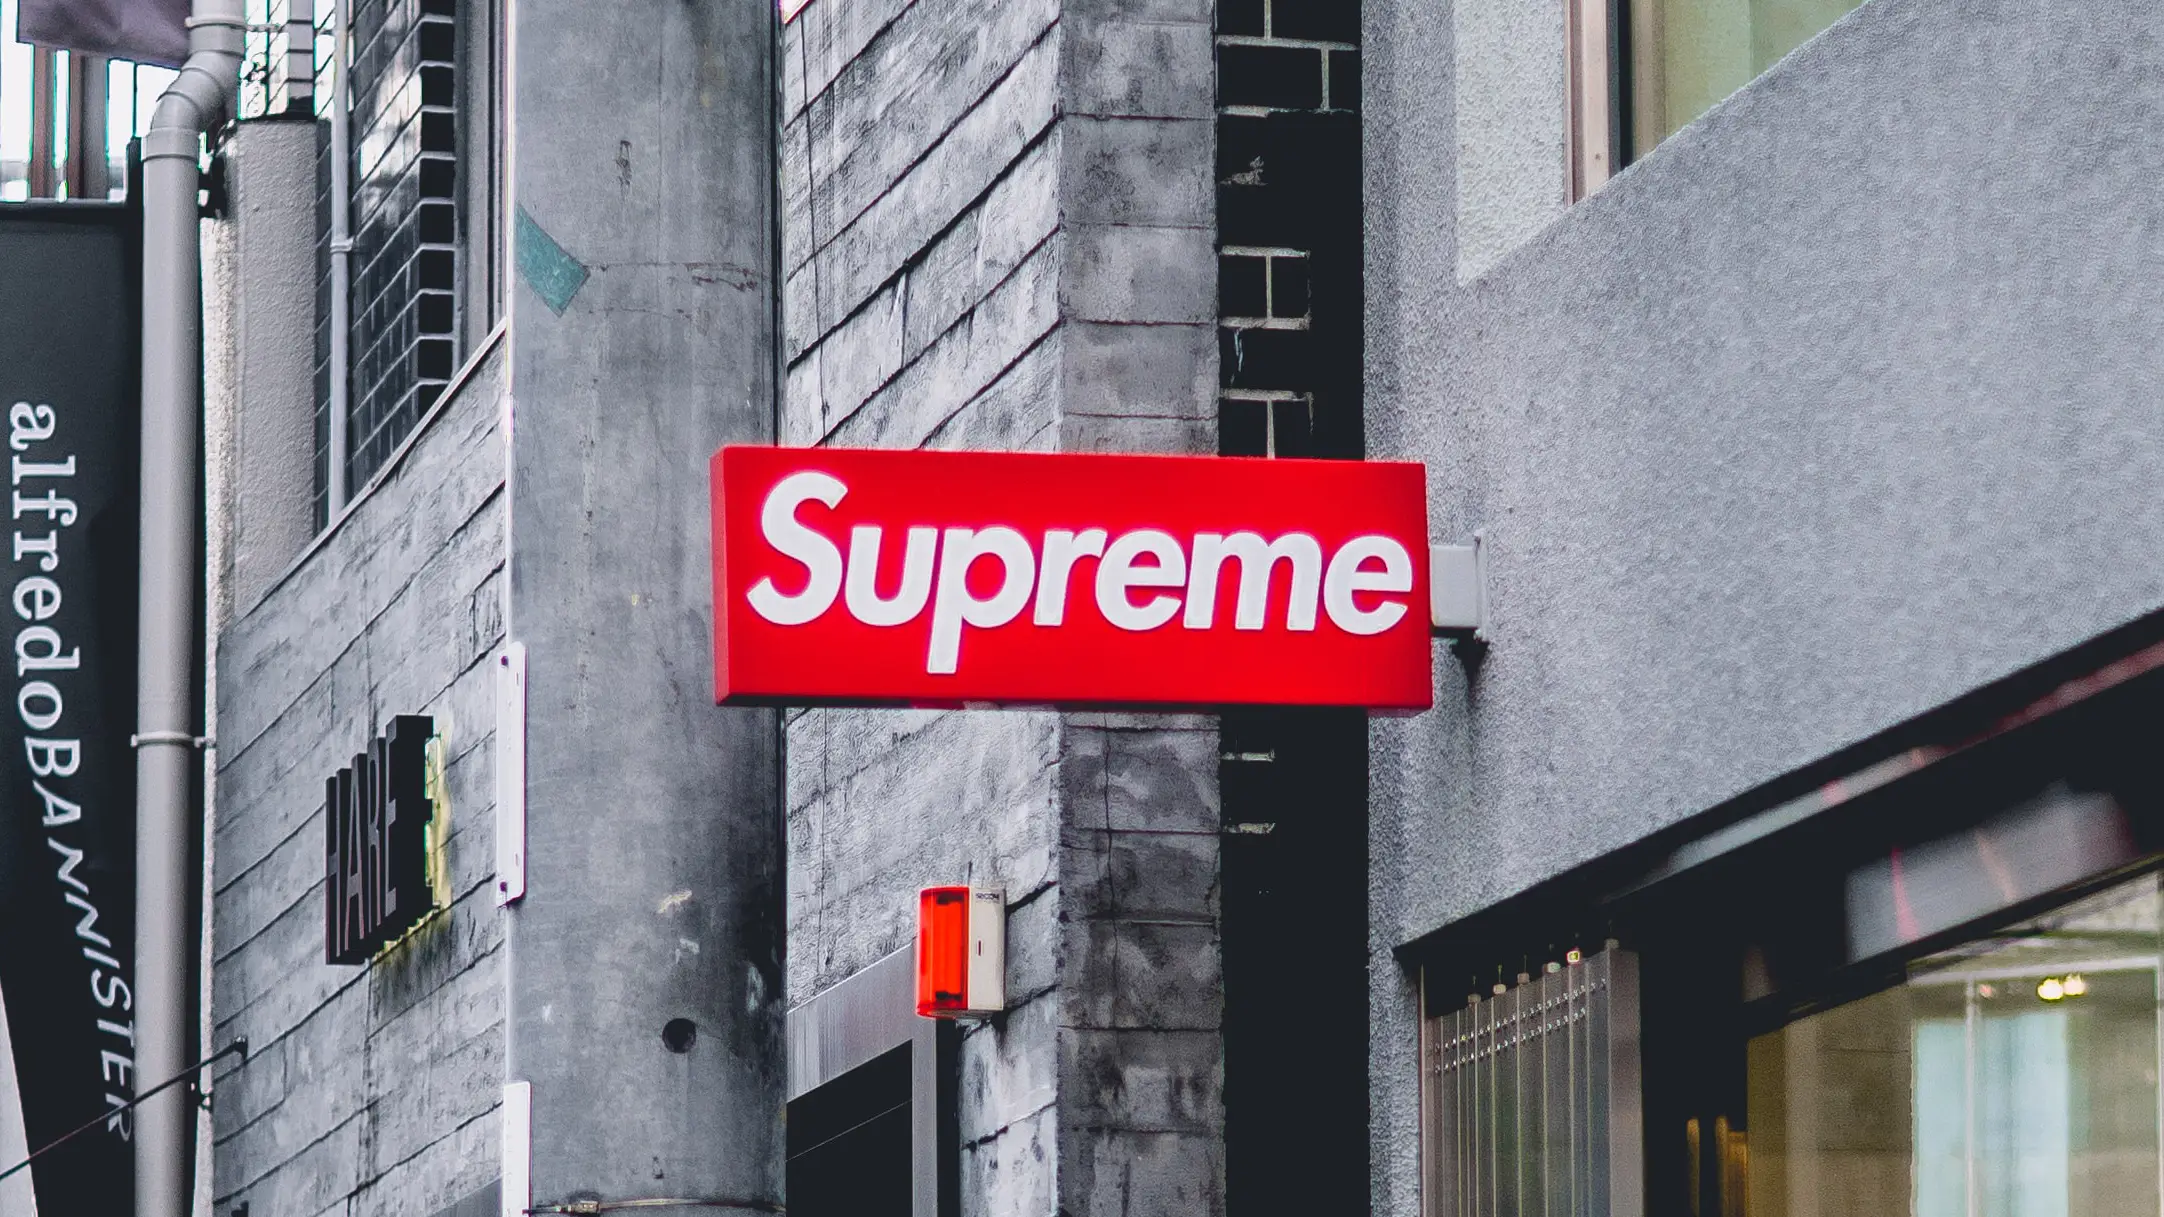 How to Cop Supreme 2022 | Guide & Tips | The Sole Supplier